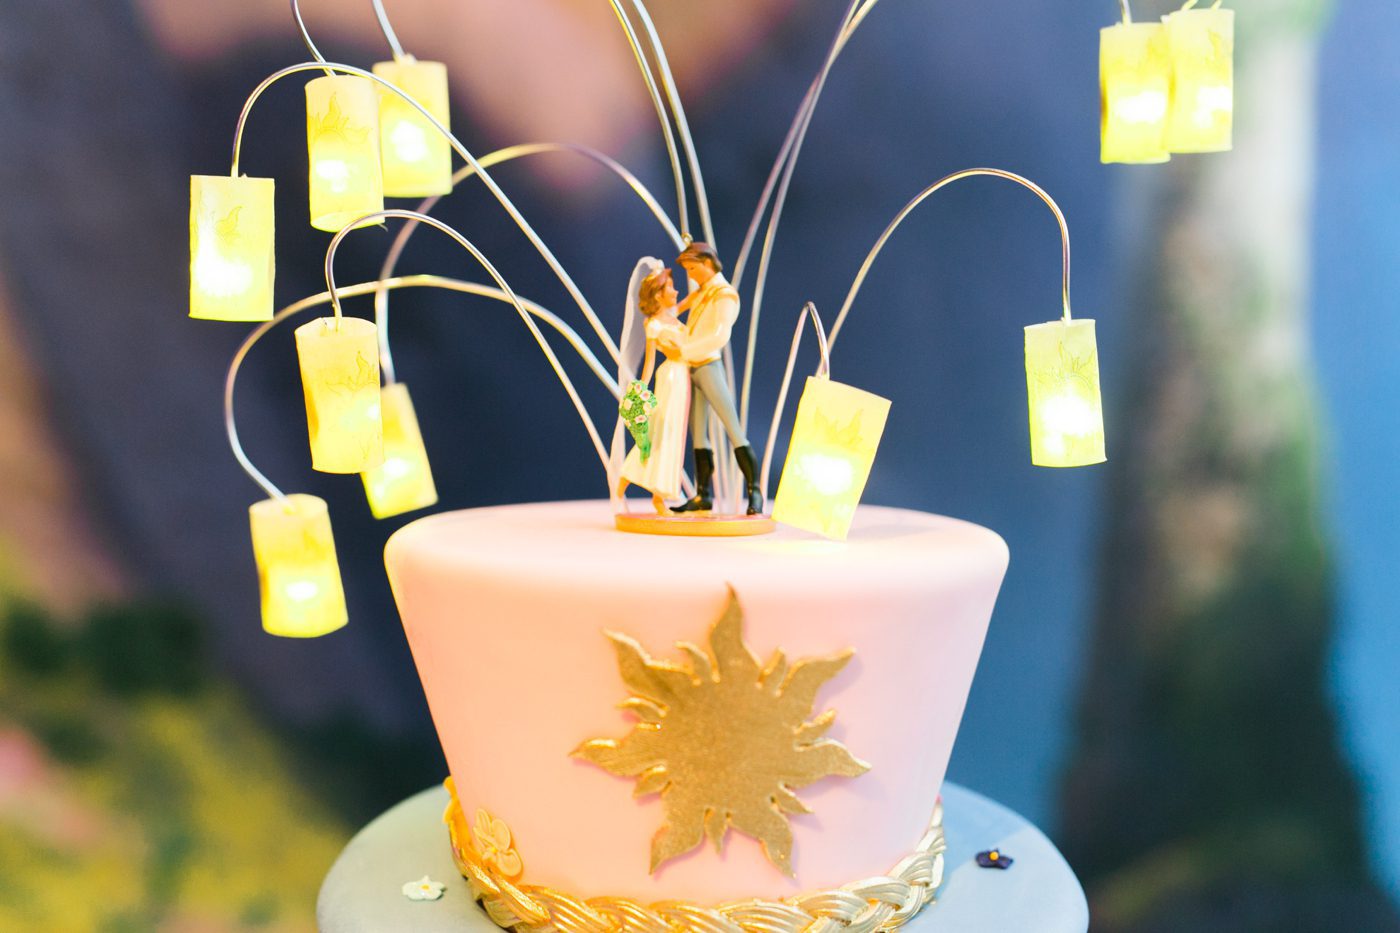 Tangled themed wedding cake with Flynn and Rapunzel cake topper 